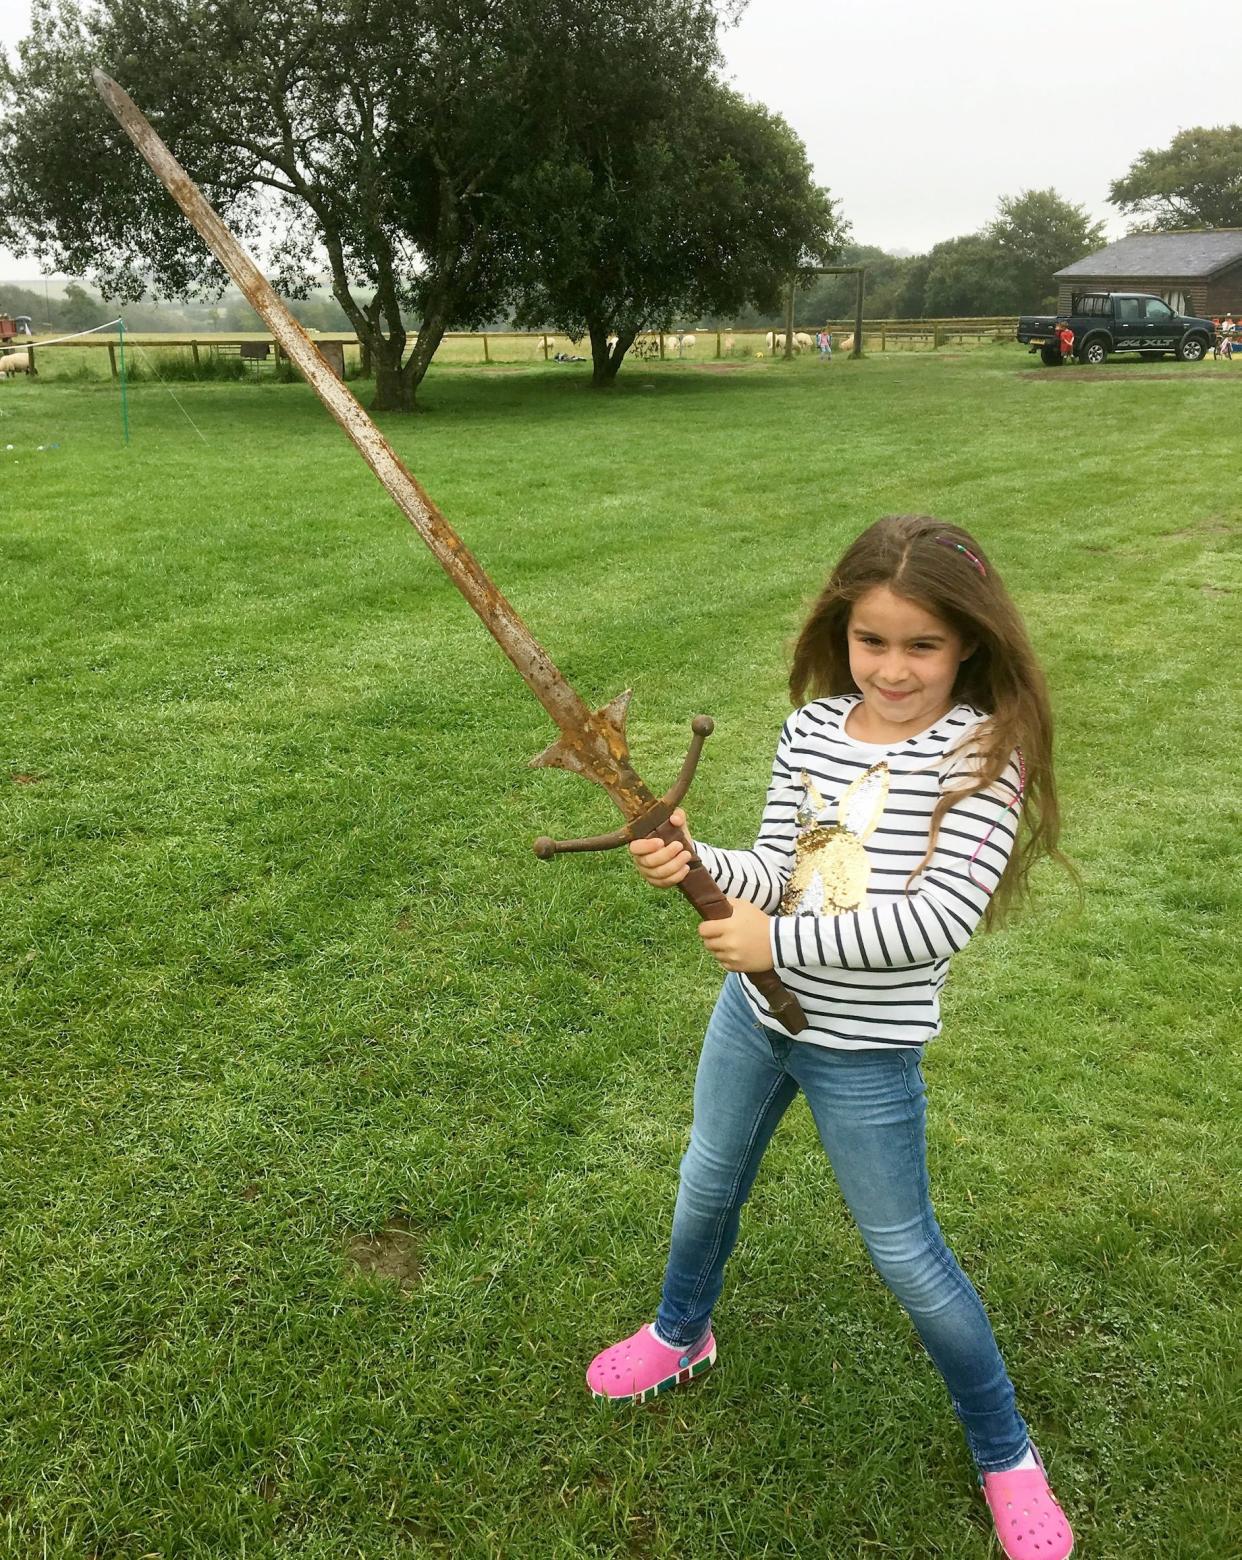 Matilda Jones, from Norton, Doncaster, shows off a mighty sword that she found at the bottom of a lake where King Arthur's said to have returned his Excalibur. (Photo: SWNS)